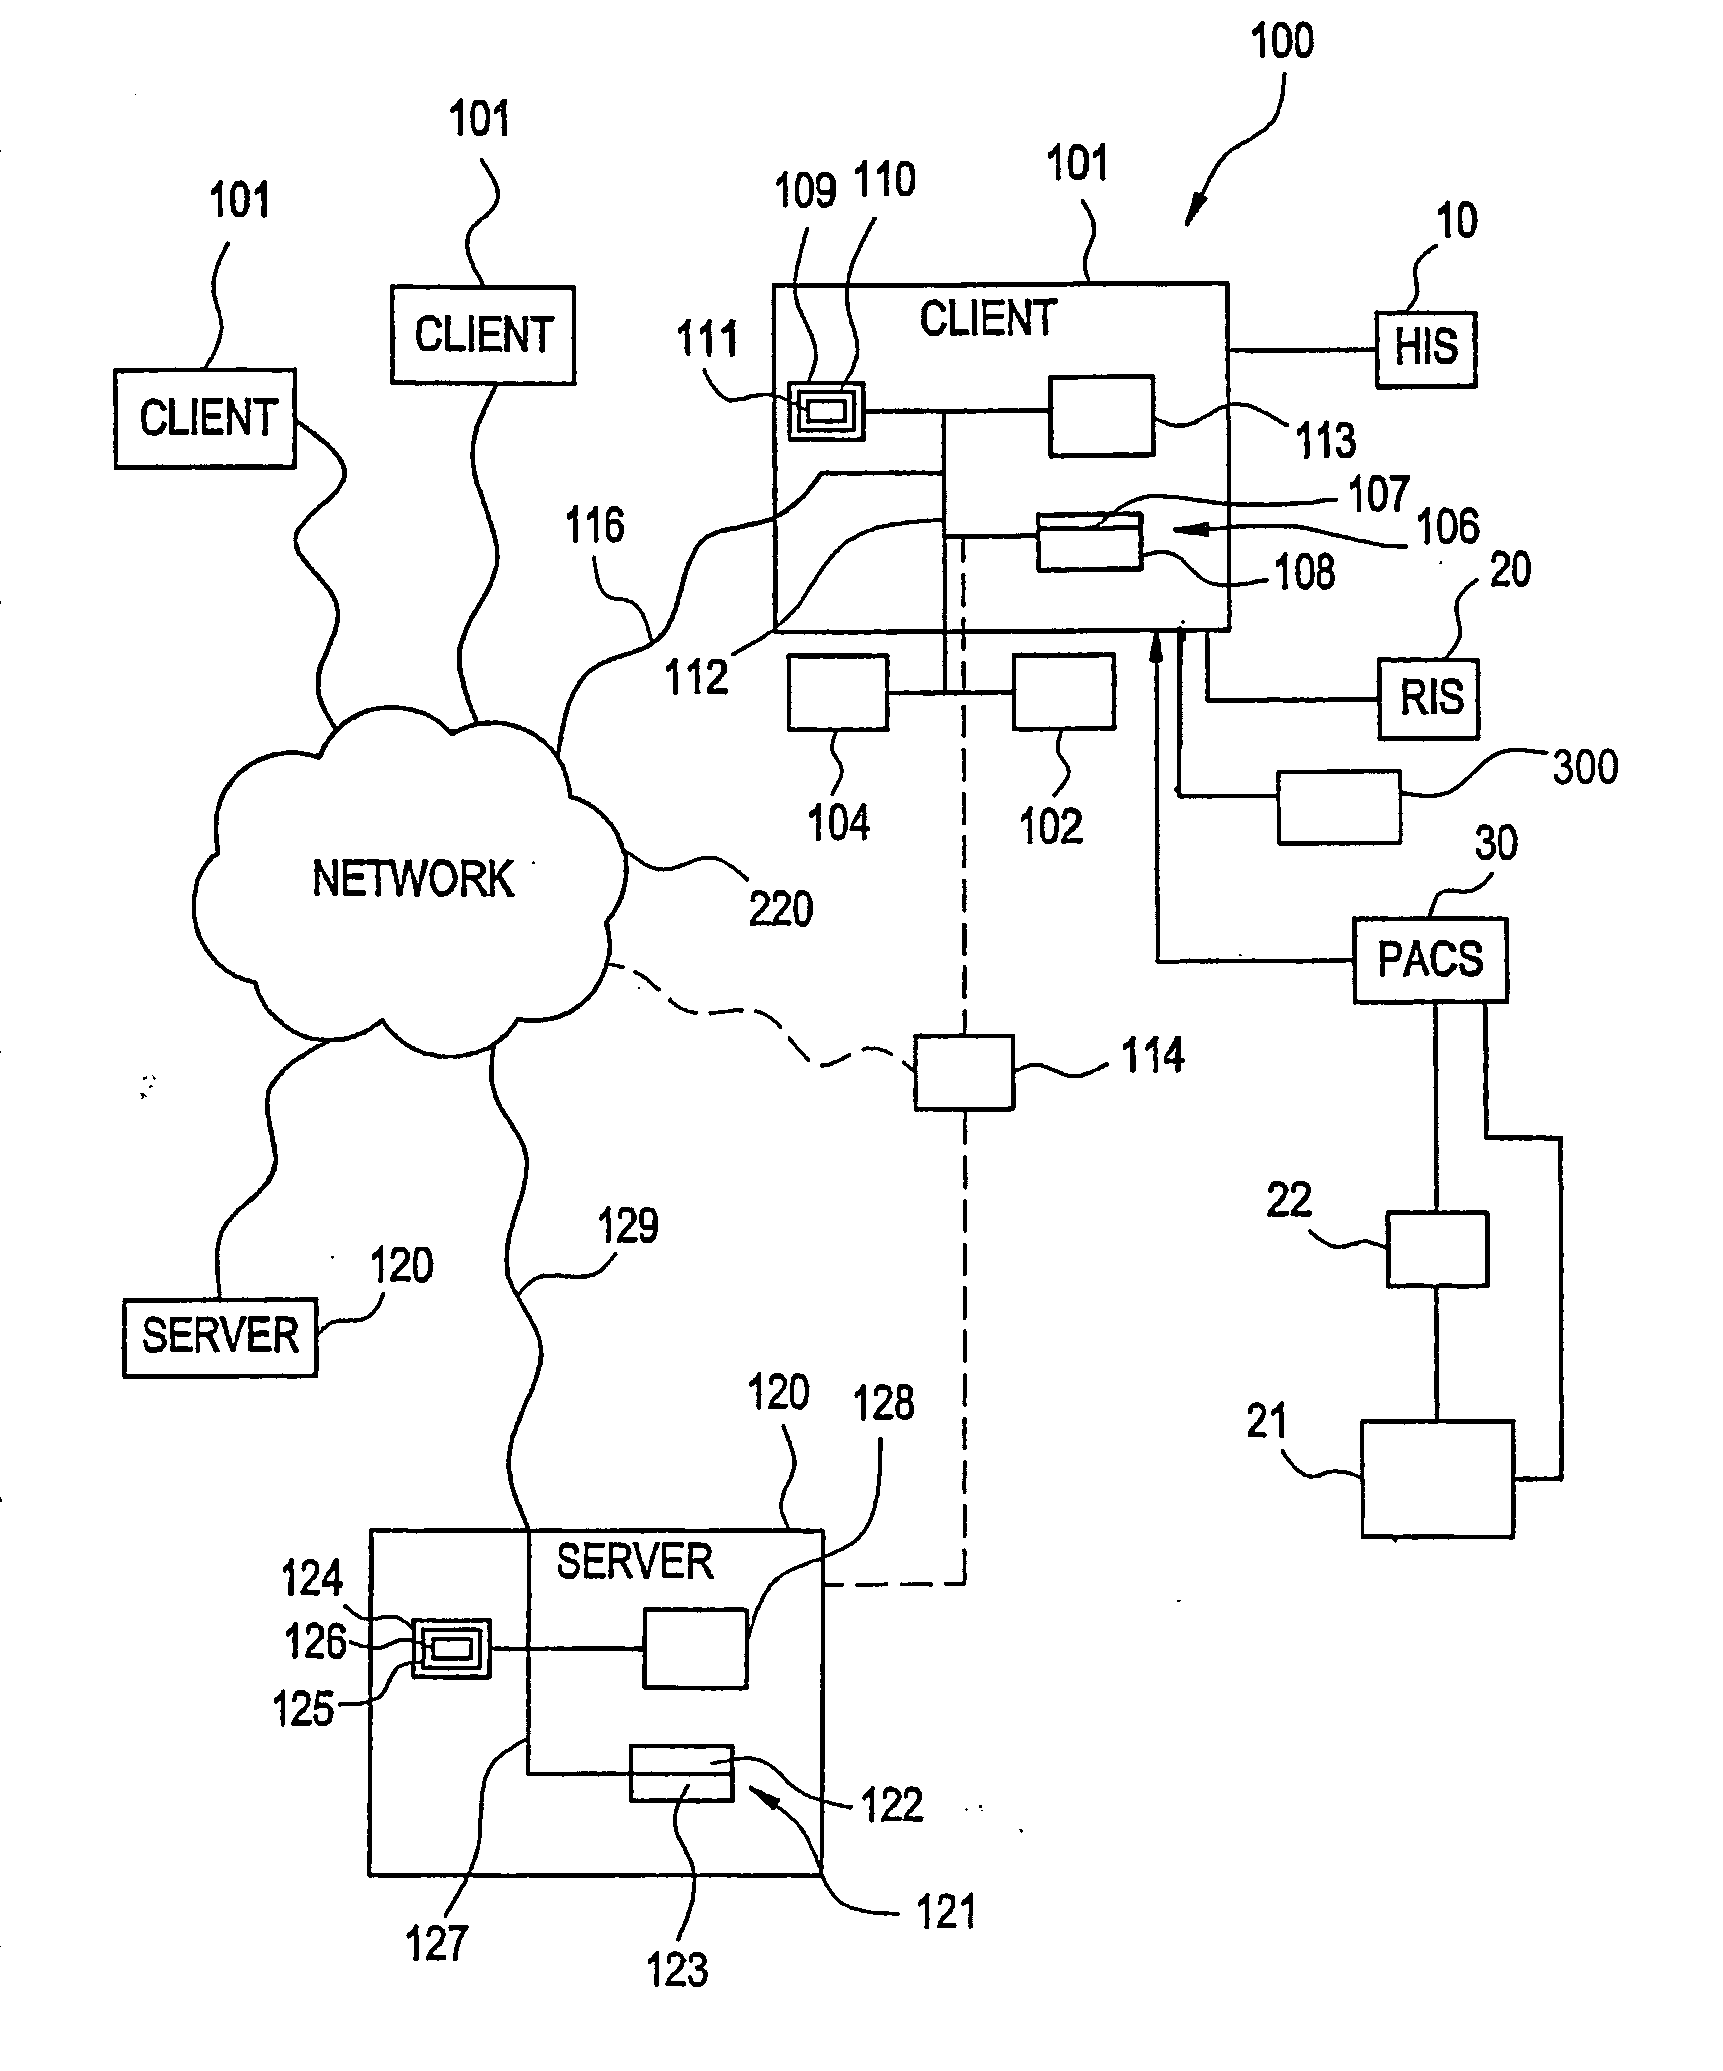 Method of data mining in medical applications